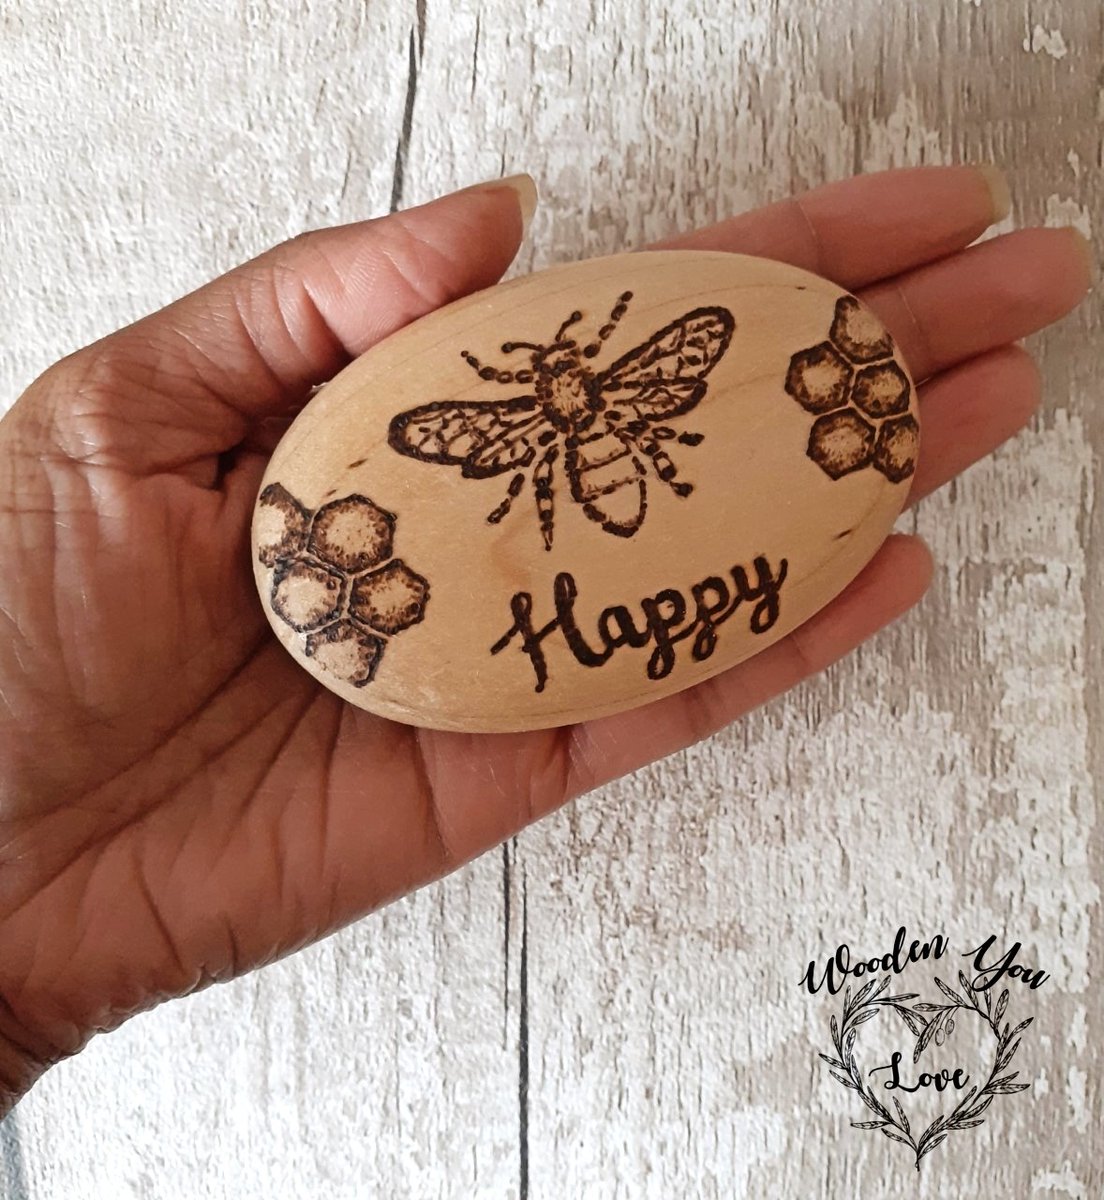 𝘽𝙚𝙚 𝙃𝙖𝙥𝙥𝙮 

Happy #worldbeeday. This hand burnt wooden pebble is the perfect reminder to be happy.

woodenyoulove.co.uk/product/handma…

#MHHSBD #elevenseshour #firsttmaster #MentalWellness